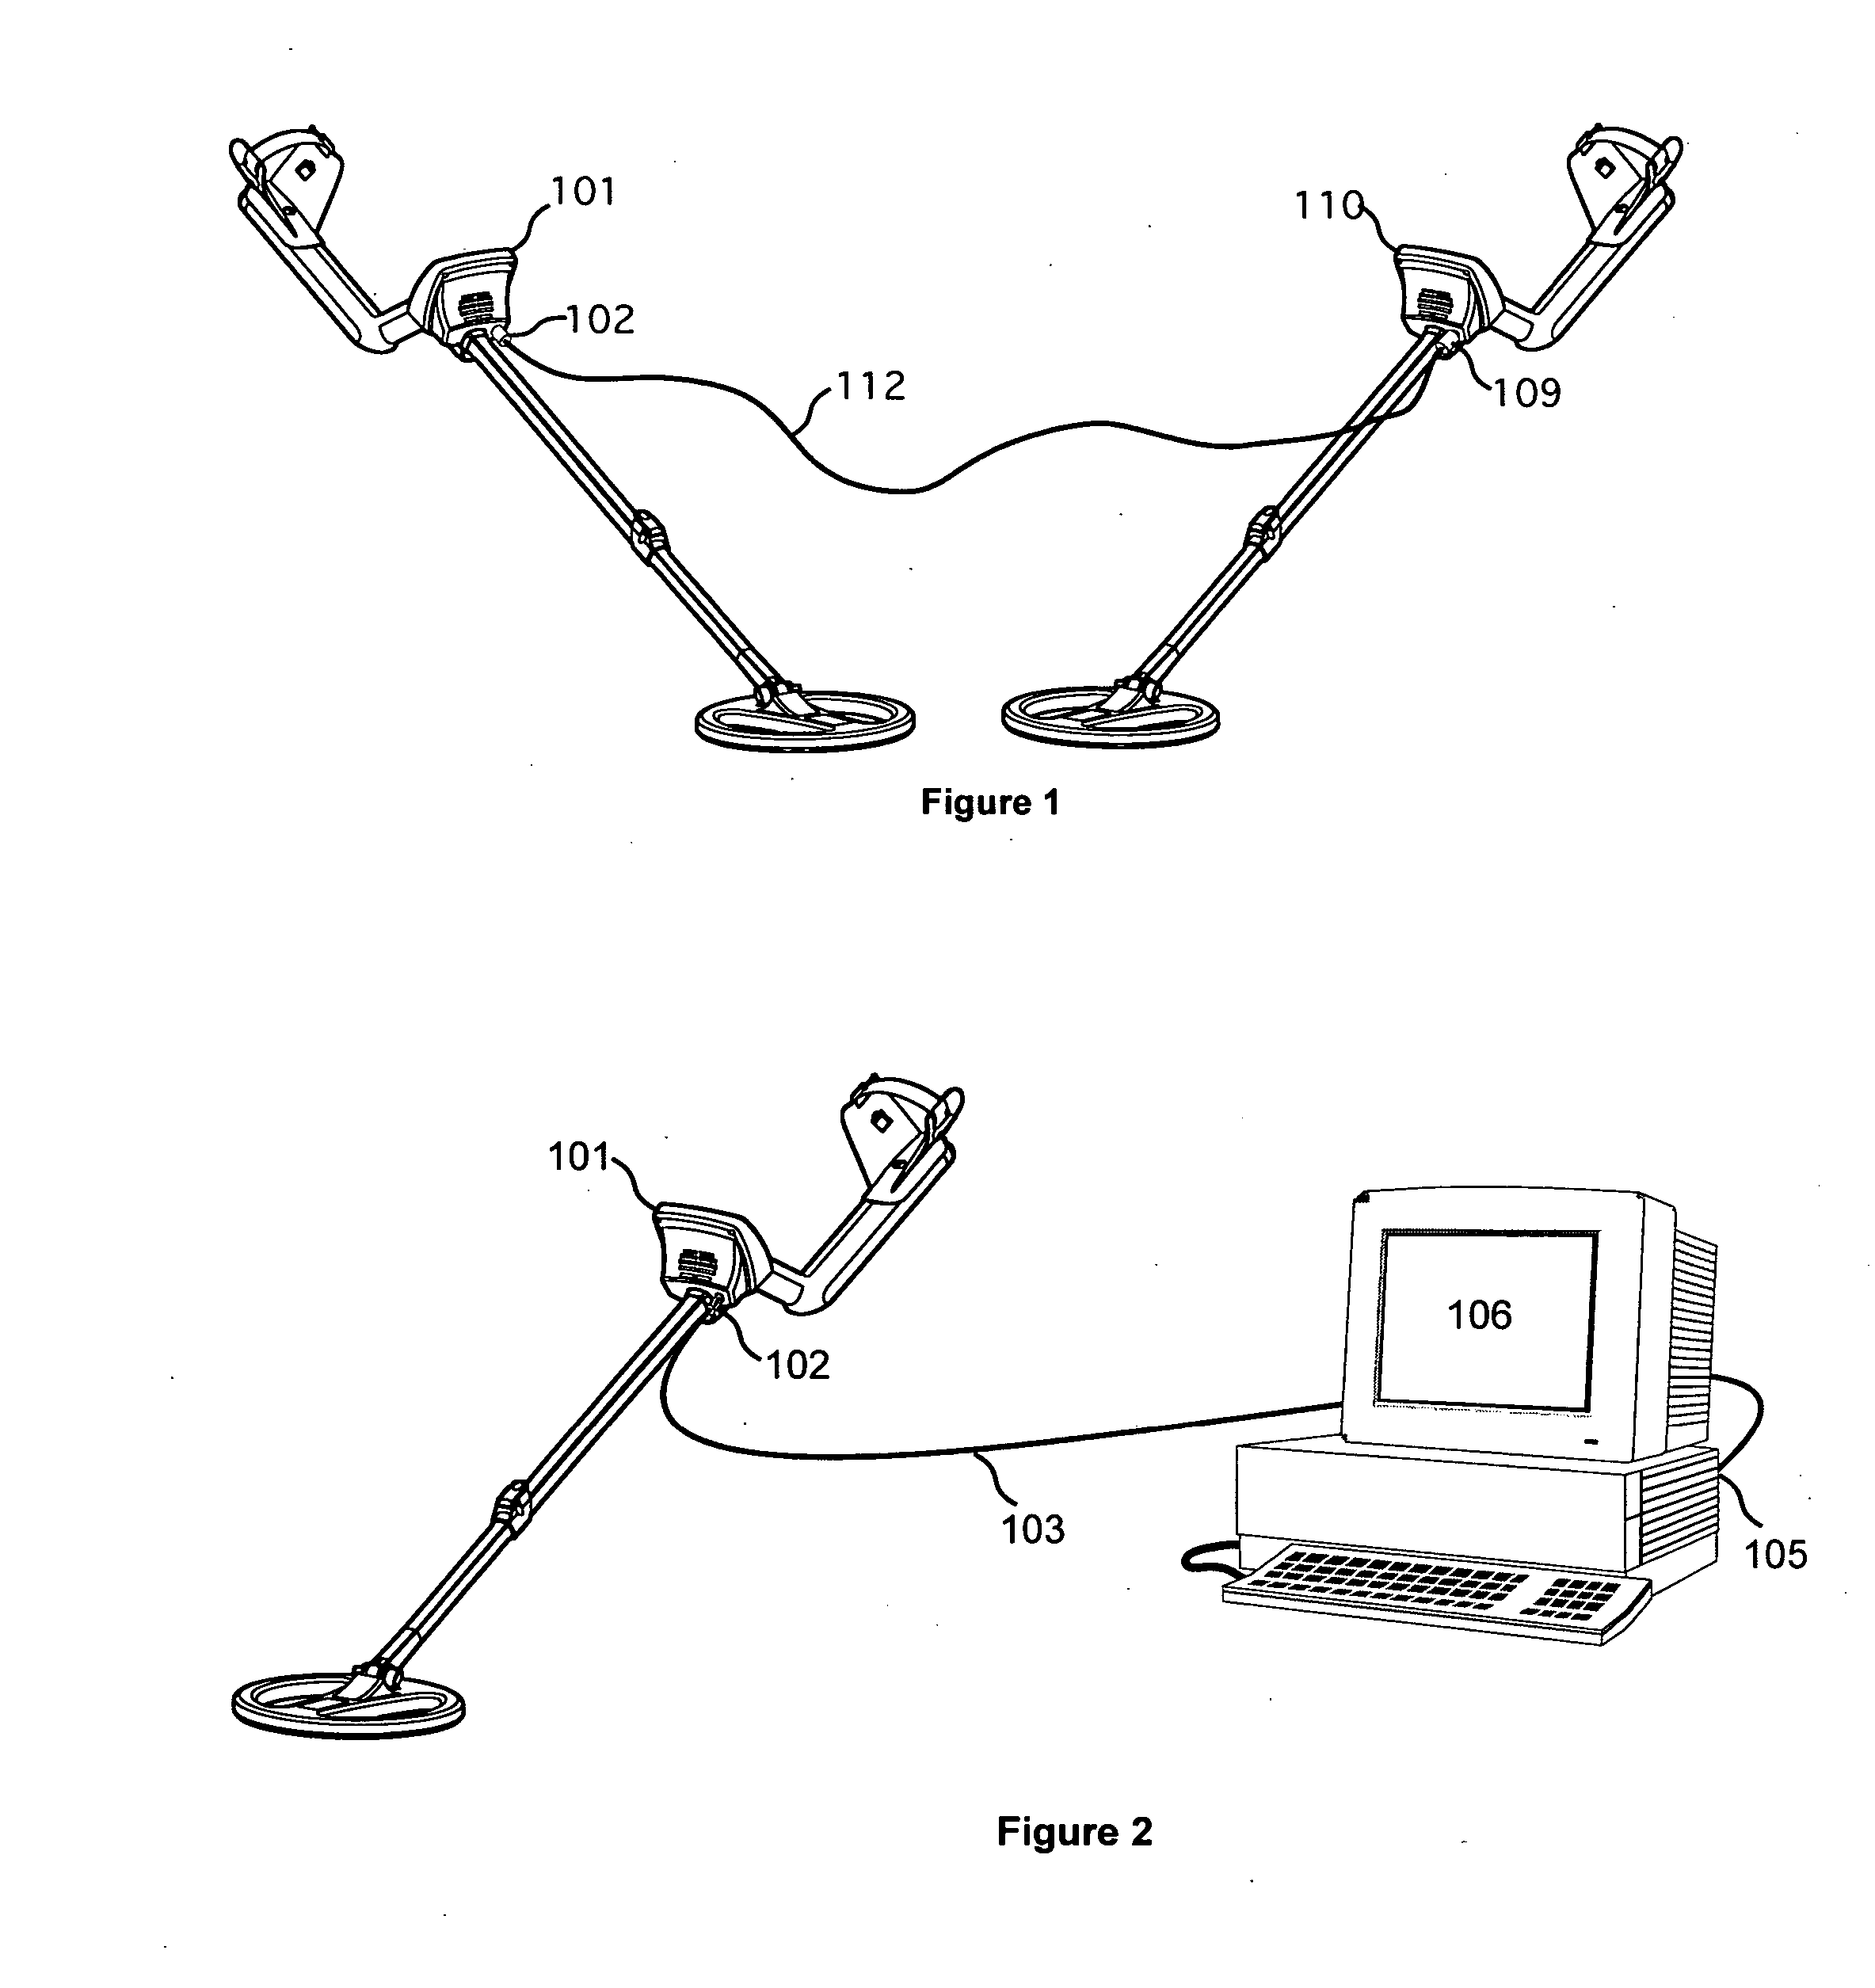 Metal detector with data transfer